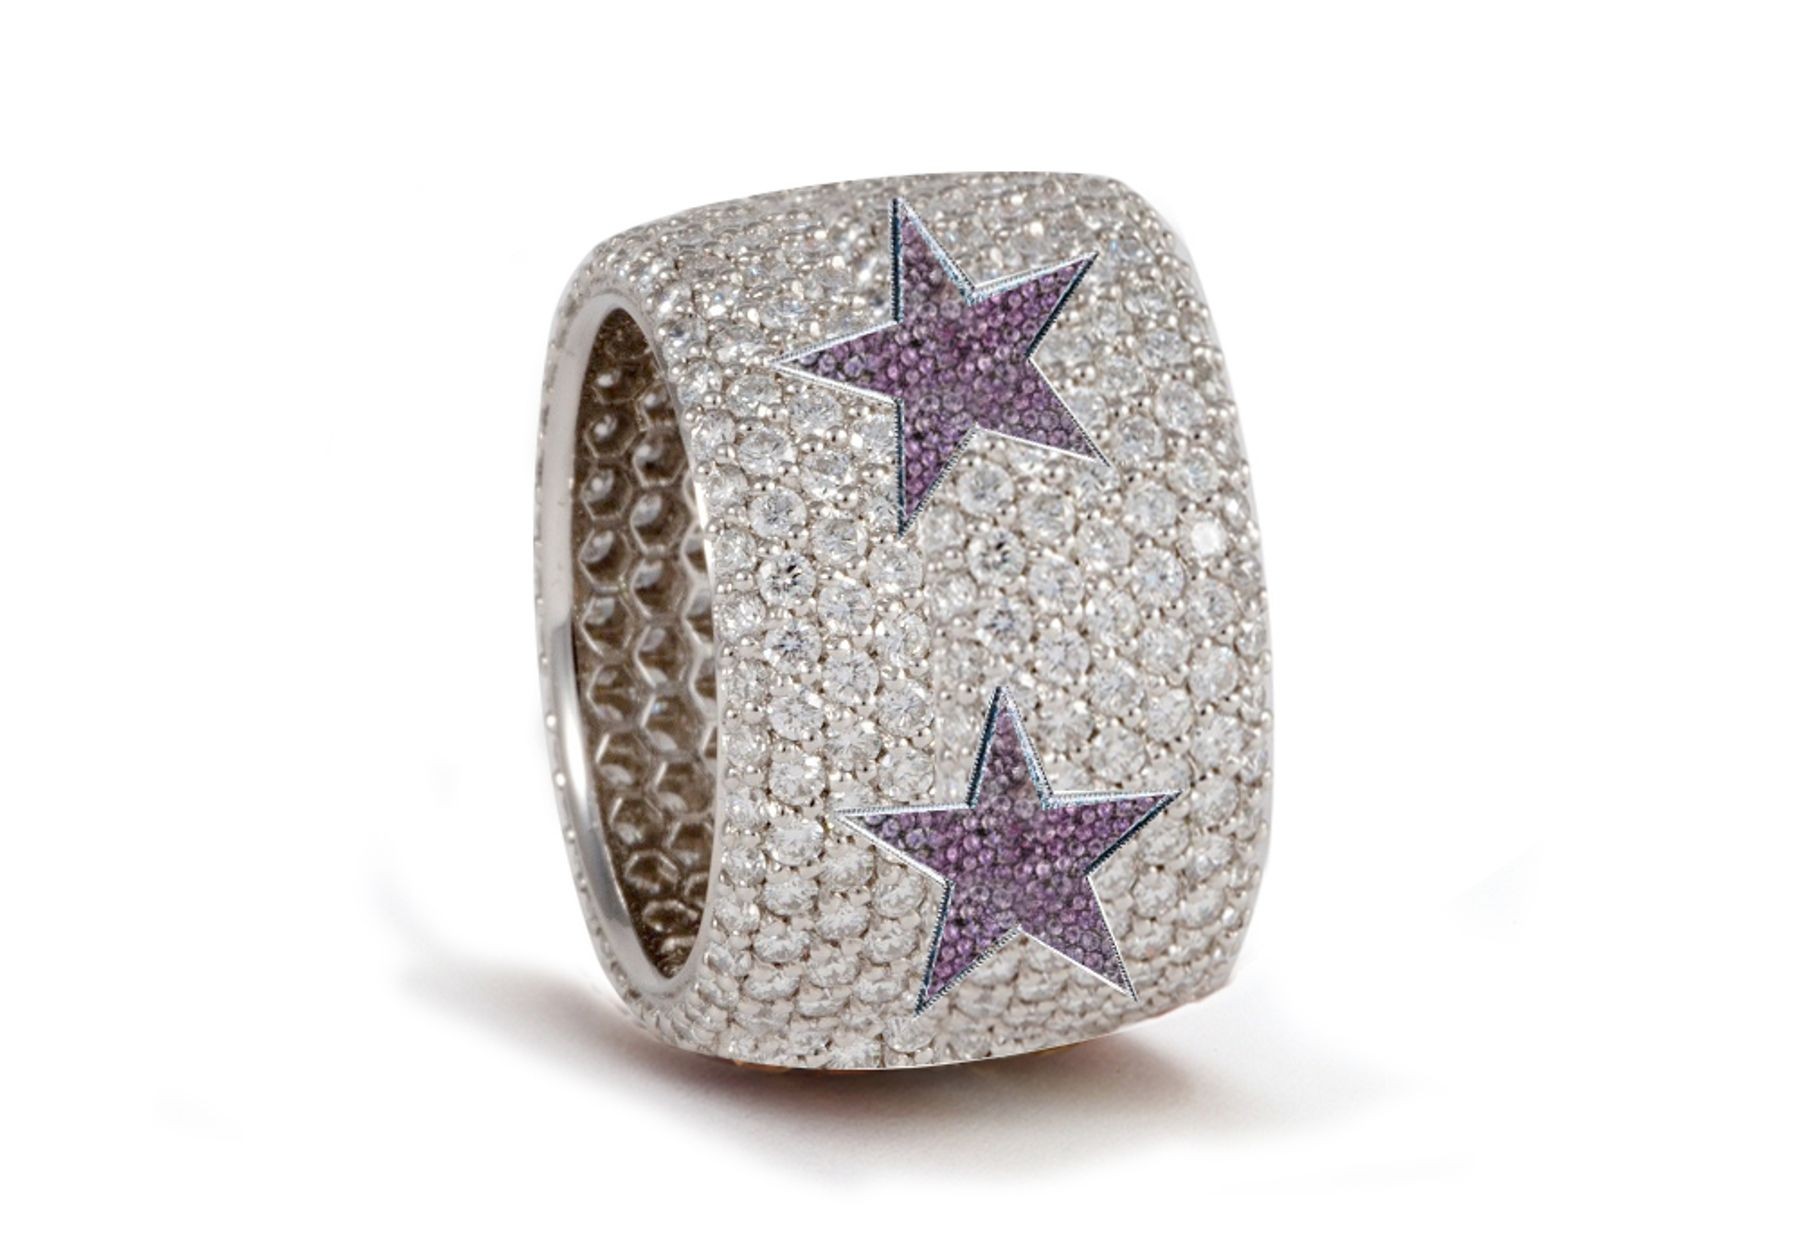 Delicate French pavee Sparkling Brilliant-Cut Round Diamonds & Vivid Multi-Colored Precious Stones Eternity Rings & Bands Featuring Celestial Stars